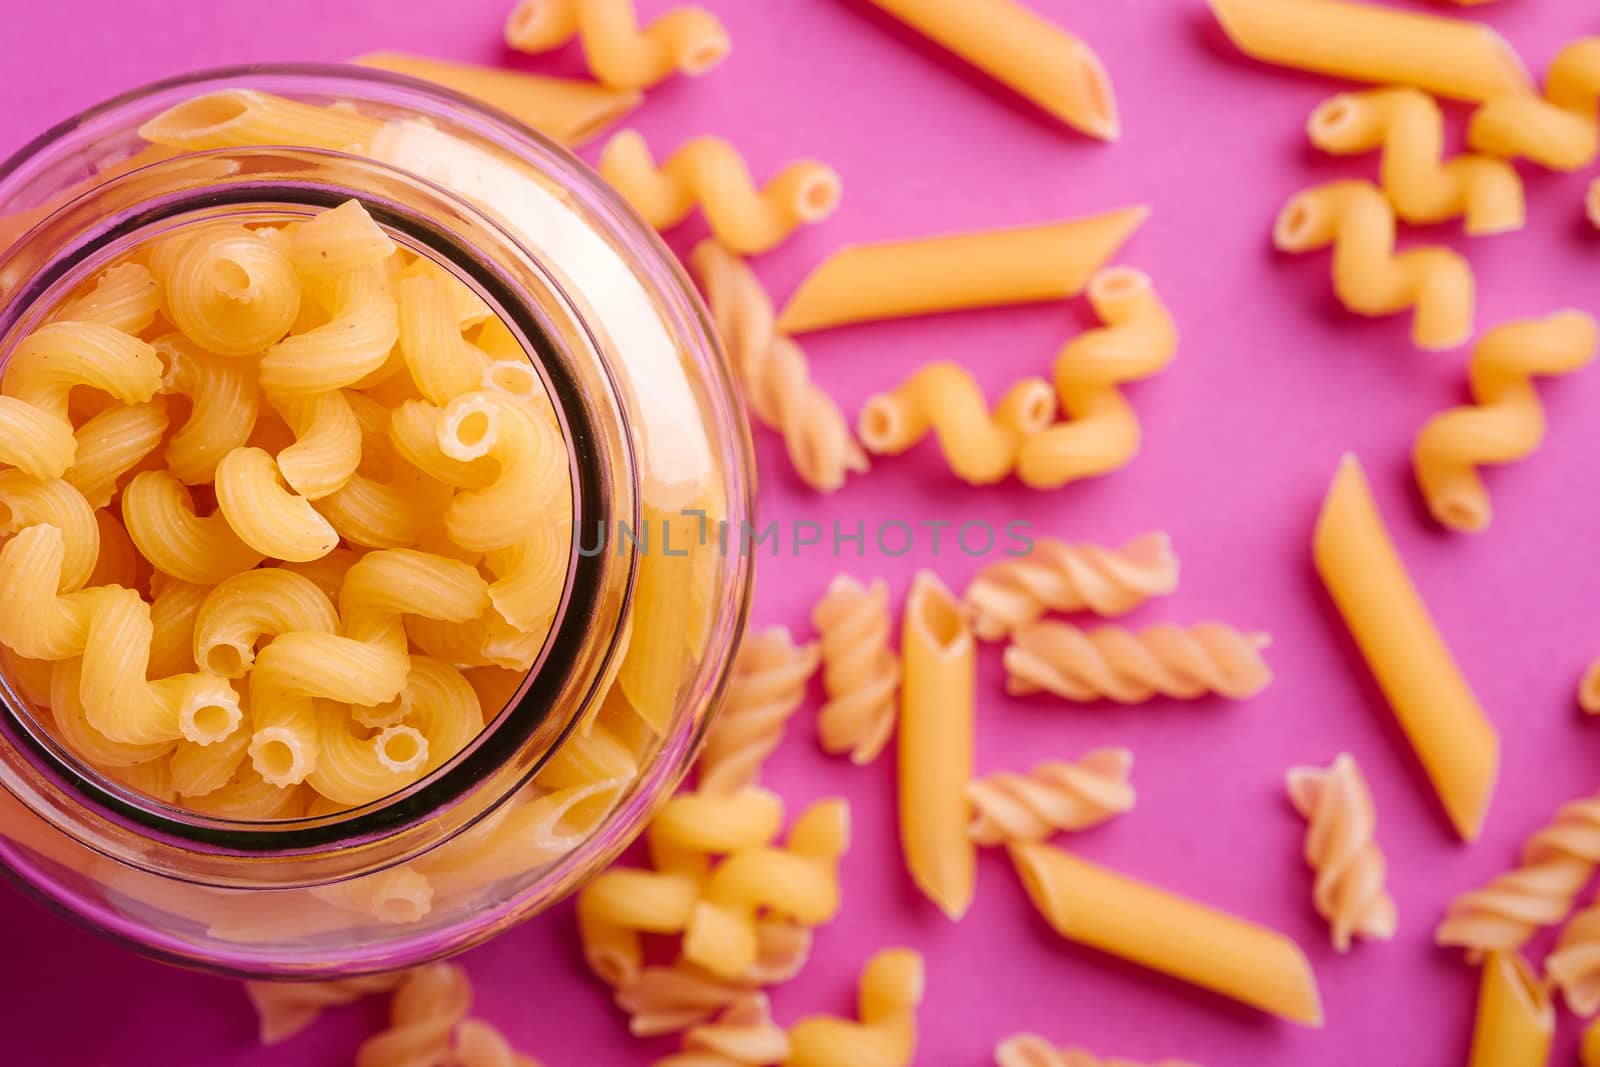 One glass jar with variety of uncooked golden wheat pasta on minimal pink background, top view macro